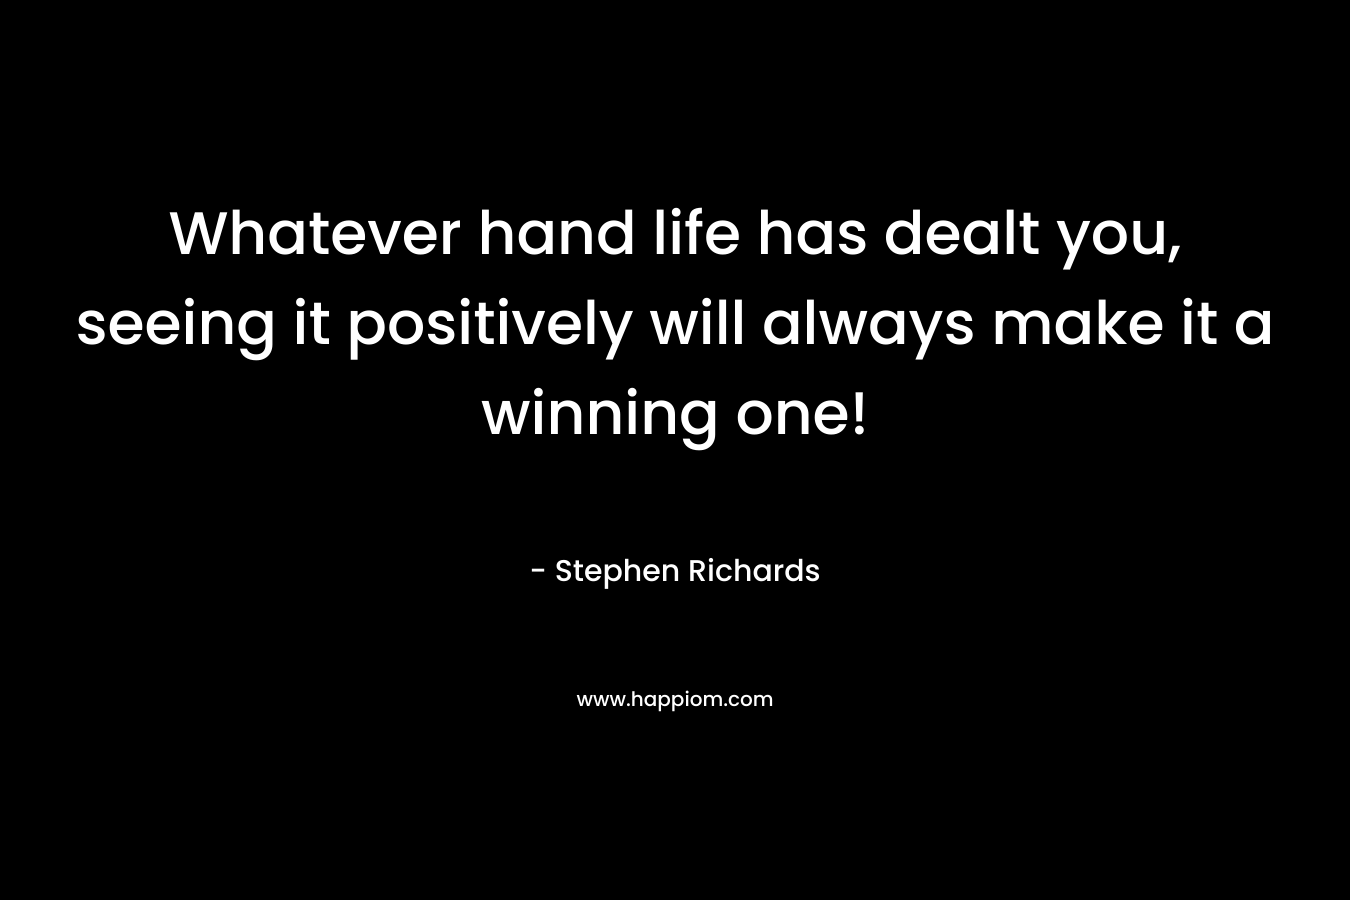 Whatever hand life has dealt you, seeing it positively will always make it a winning one!